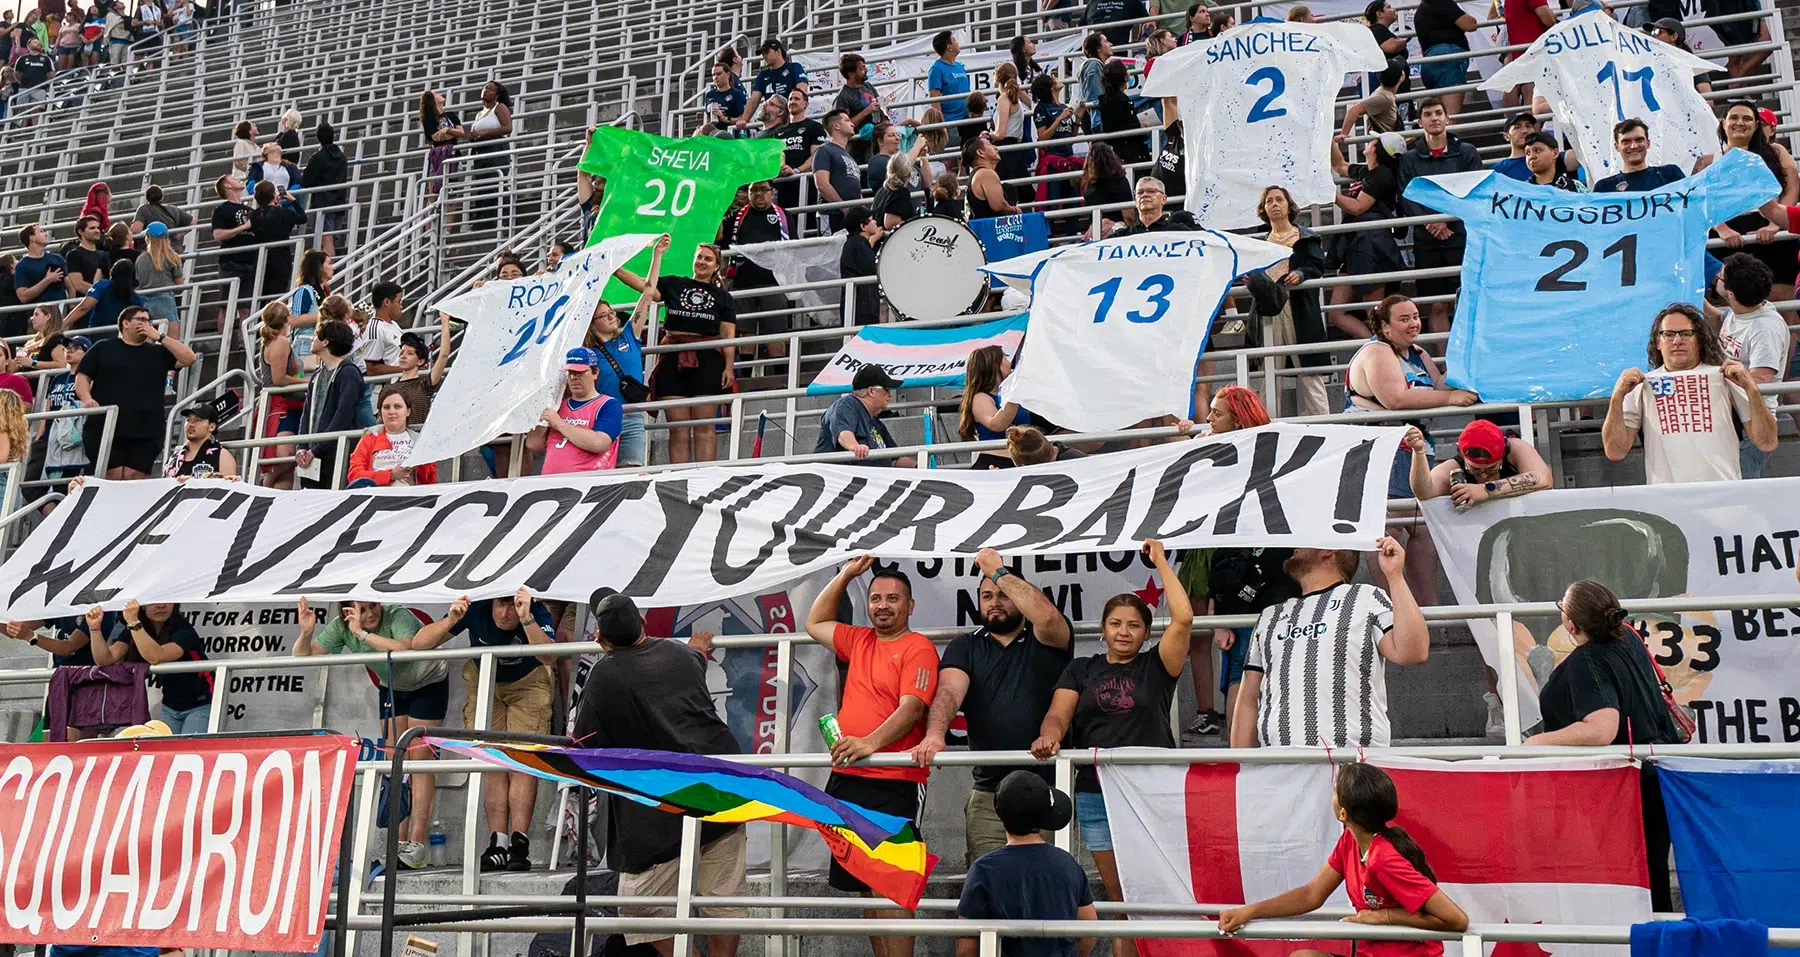 Members of the Spirit Squadron fold up a tifo that reads "We've got your back!" and individual tifos cut into the shape of soccer jerseys with the names and numbers of the six Spirit players going to the FIFA Women's World Cup.